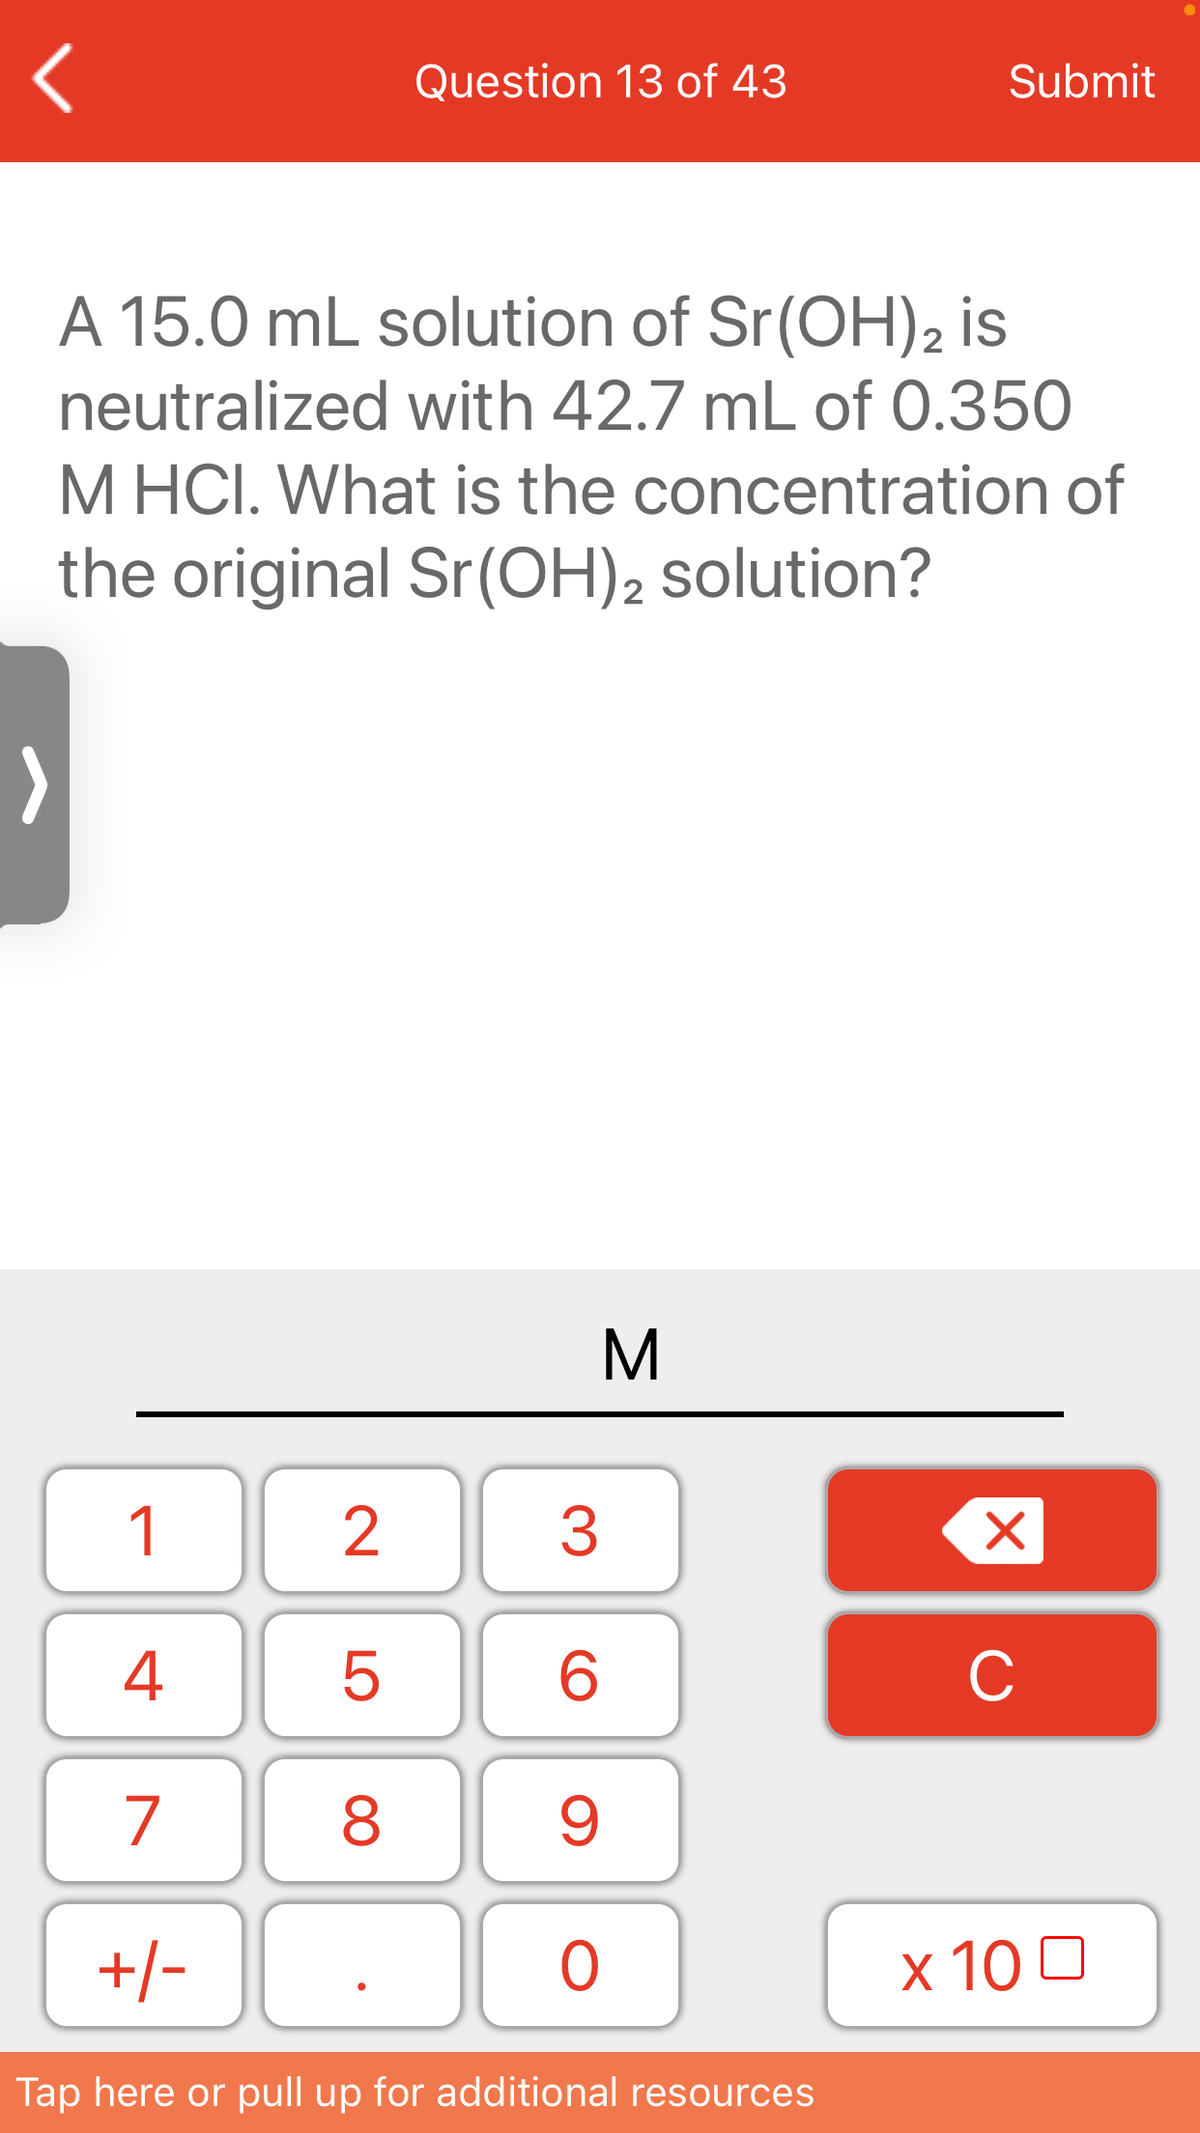 Question 13 of 43
Submit
A 15.0 mL solution of Sr(OH)2 is
neutralized with 42.7 mL of 0.350
M HCI. What is the concentration of
the original Sr(OH)2 solution?
M
1
4
C
7
8
+/-
x 10 0
Tap here or pull up for additional resources
LO
